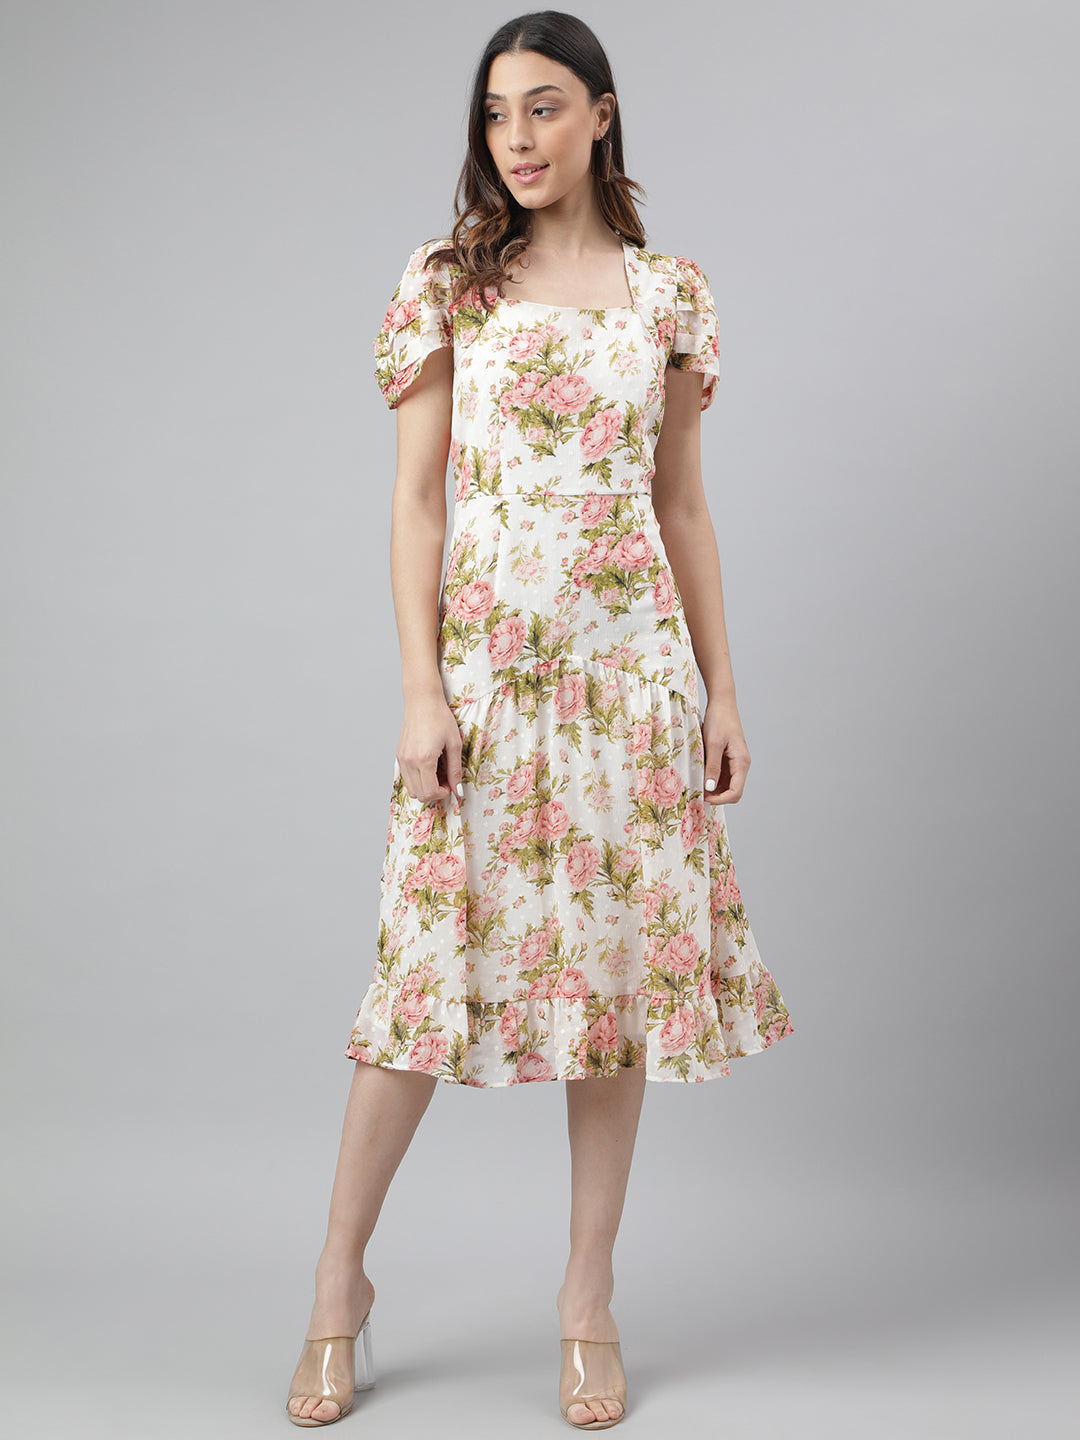 Red Half Sleeve Square Neck Floral Print A-Line Women Dress for Casual